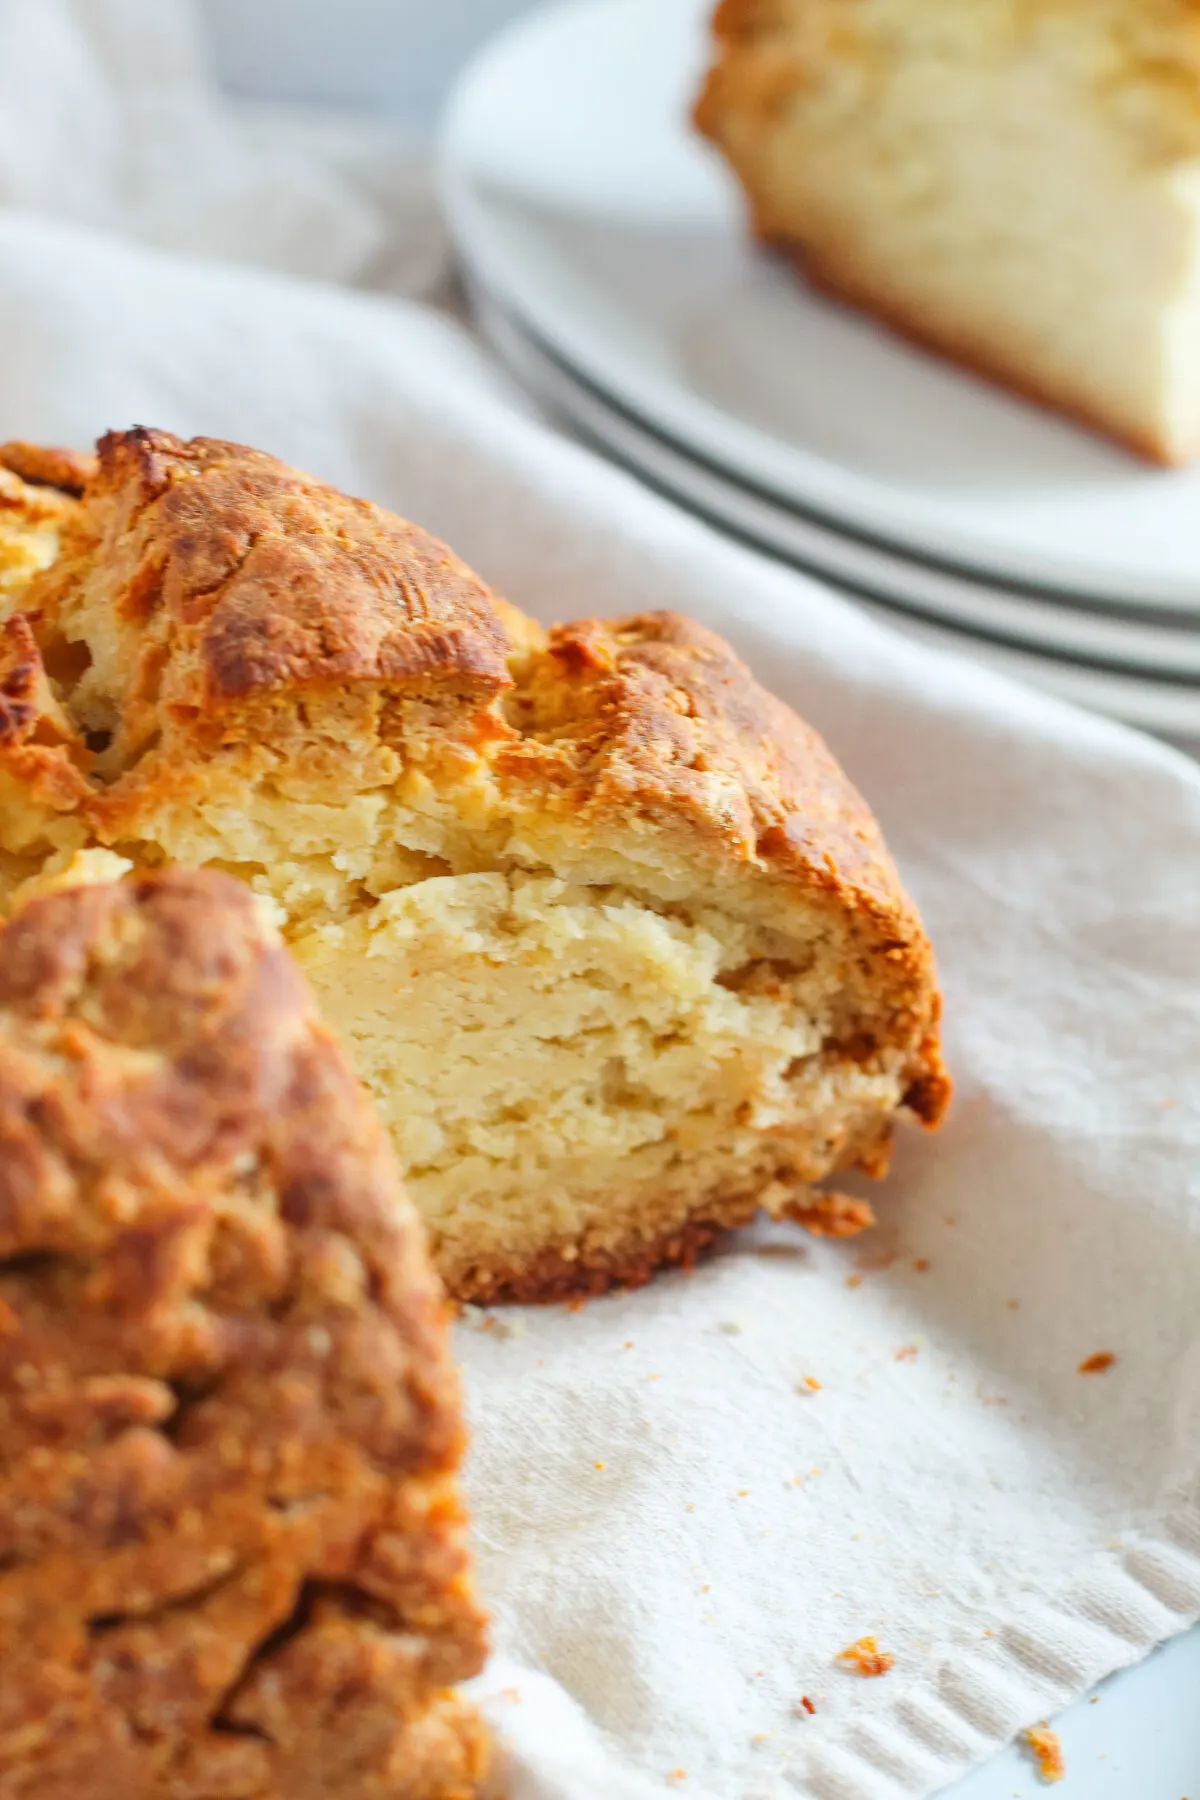 Bring a touch of Ireland to your kitchen with this gluten free Irish soda bread recipe. Perfect for St. Patrick's Day or anytime!